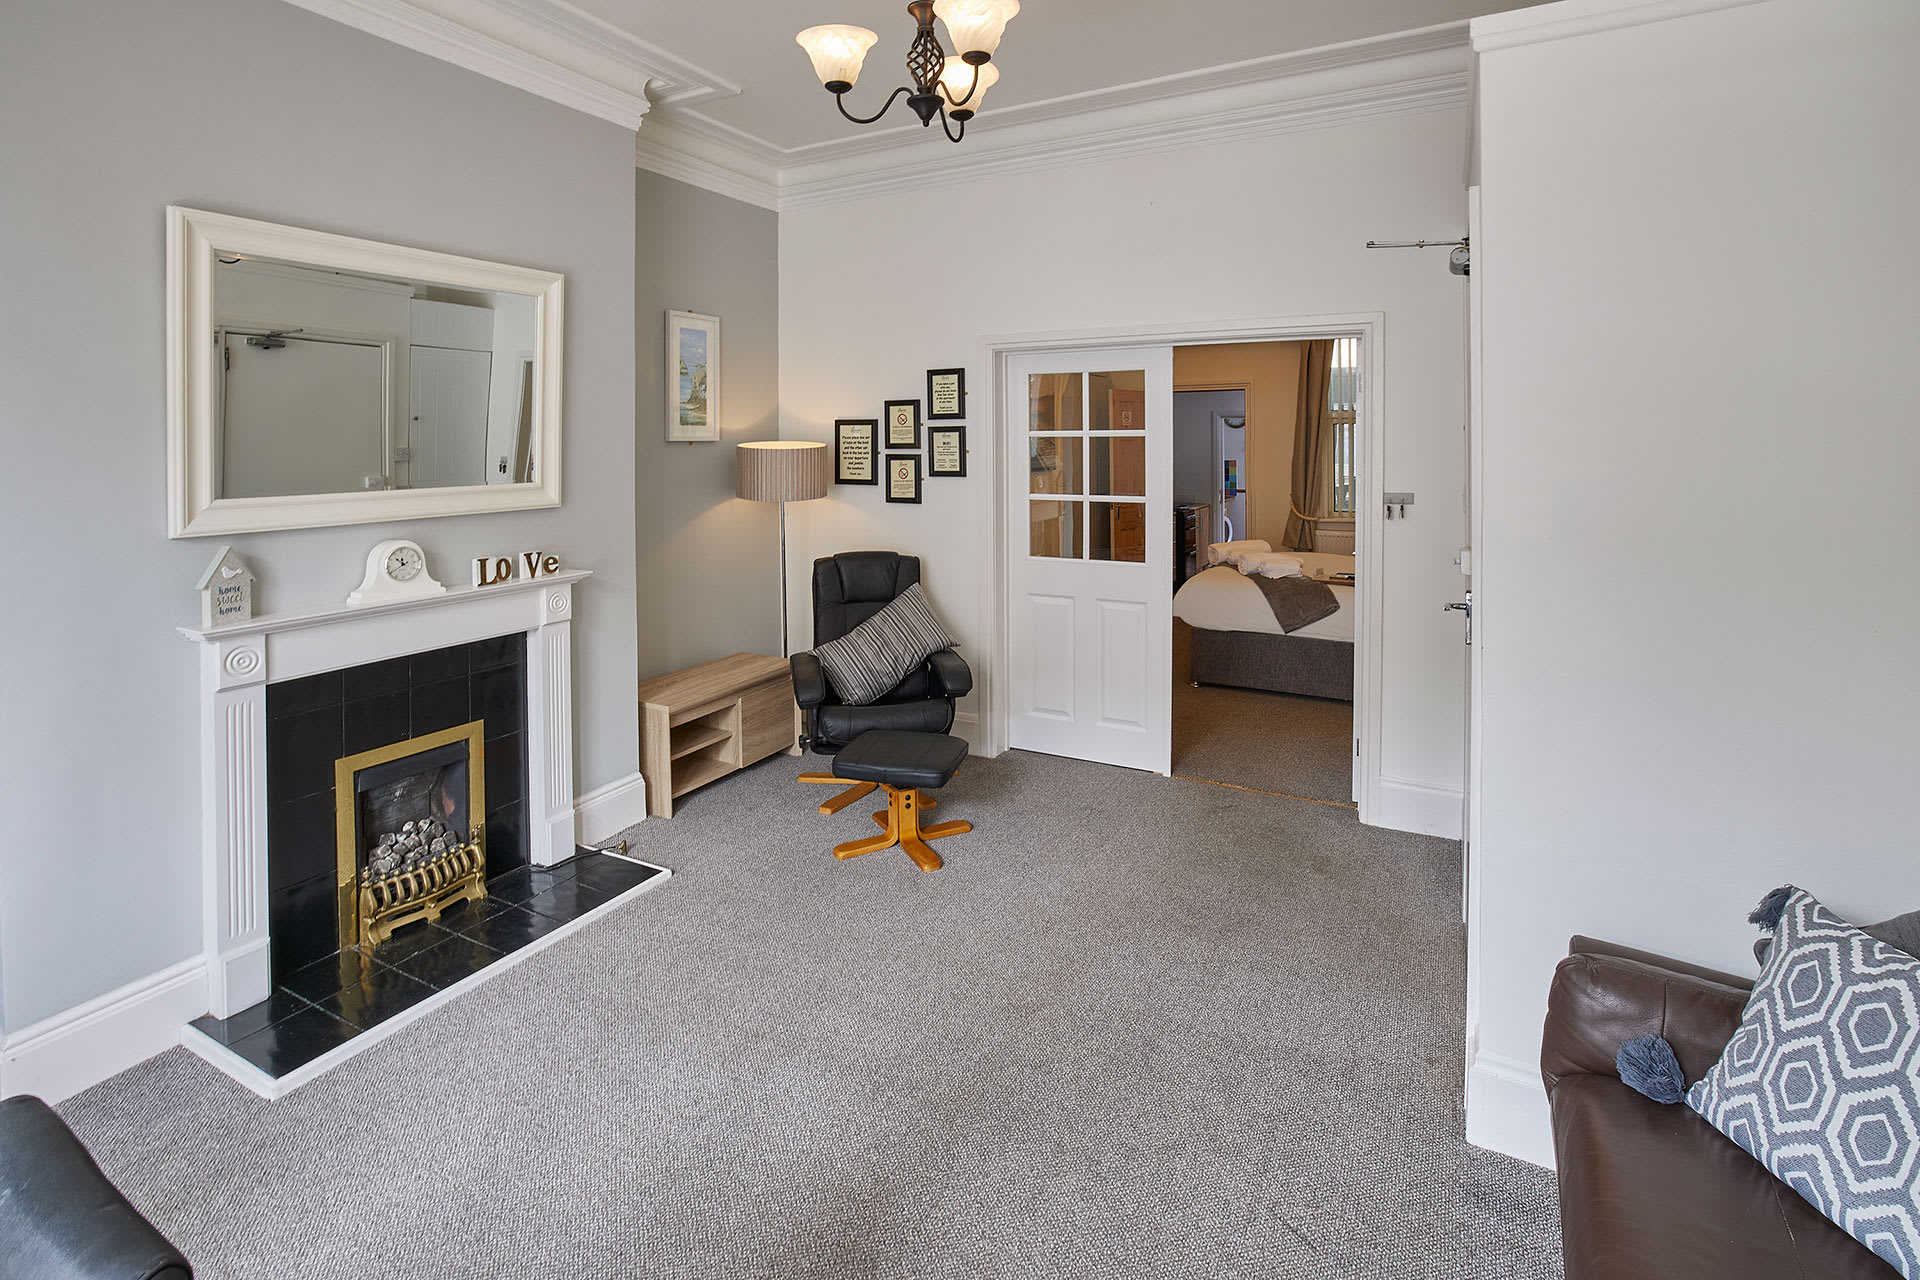 Apartment 1 At Glencoe, Whitby - Stay North Yorkshire